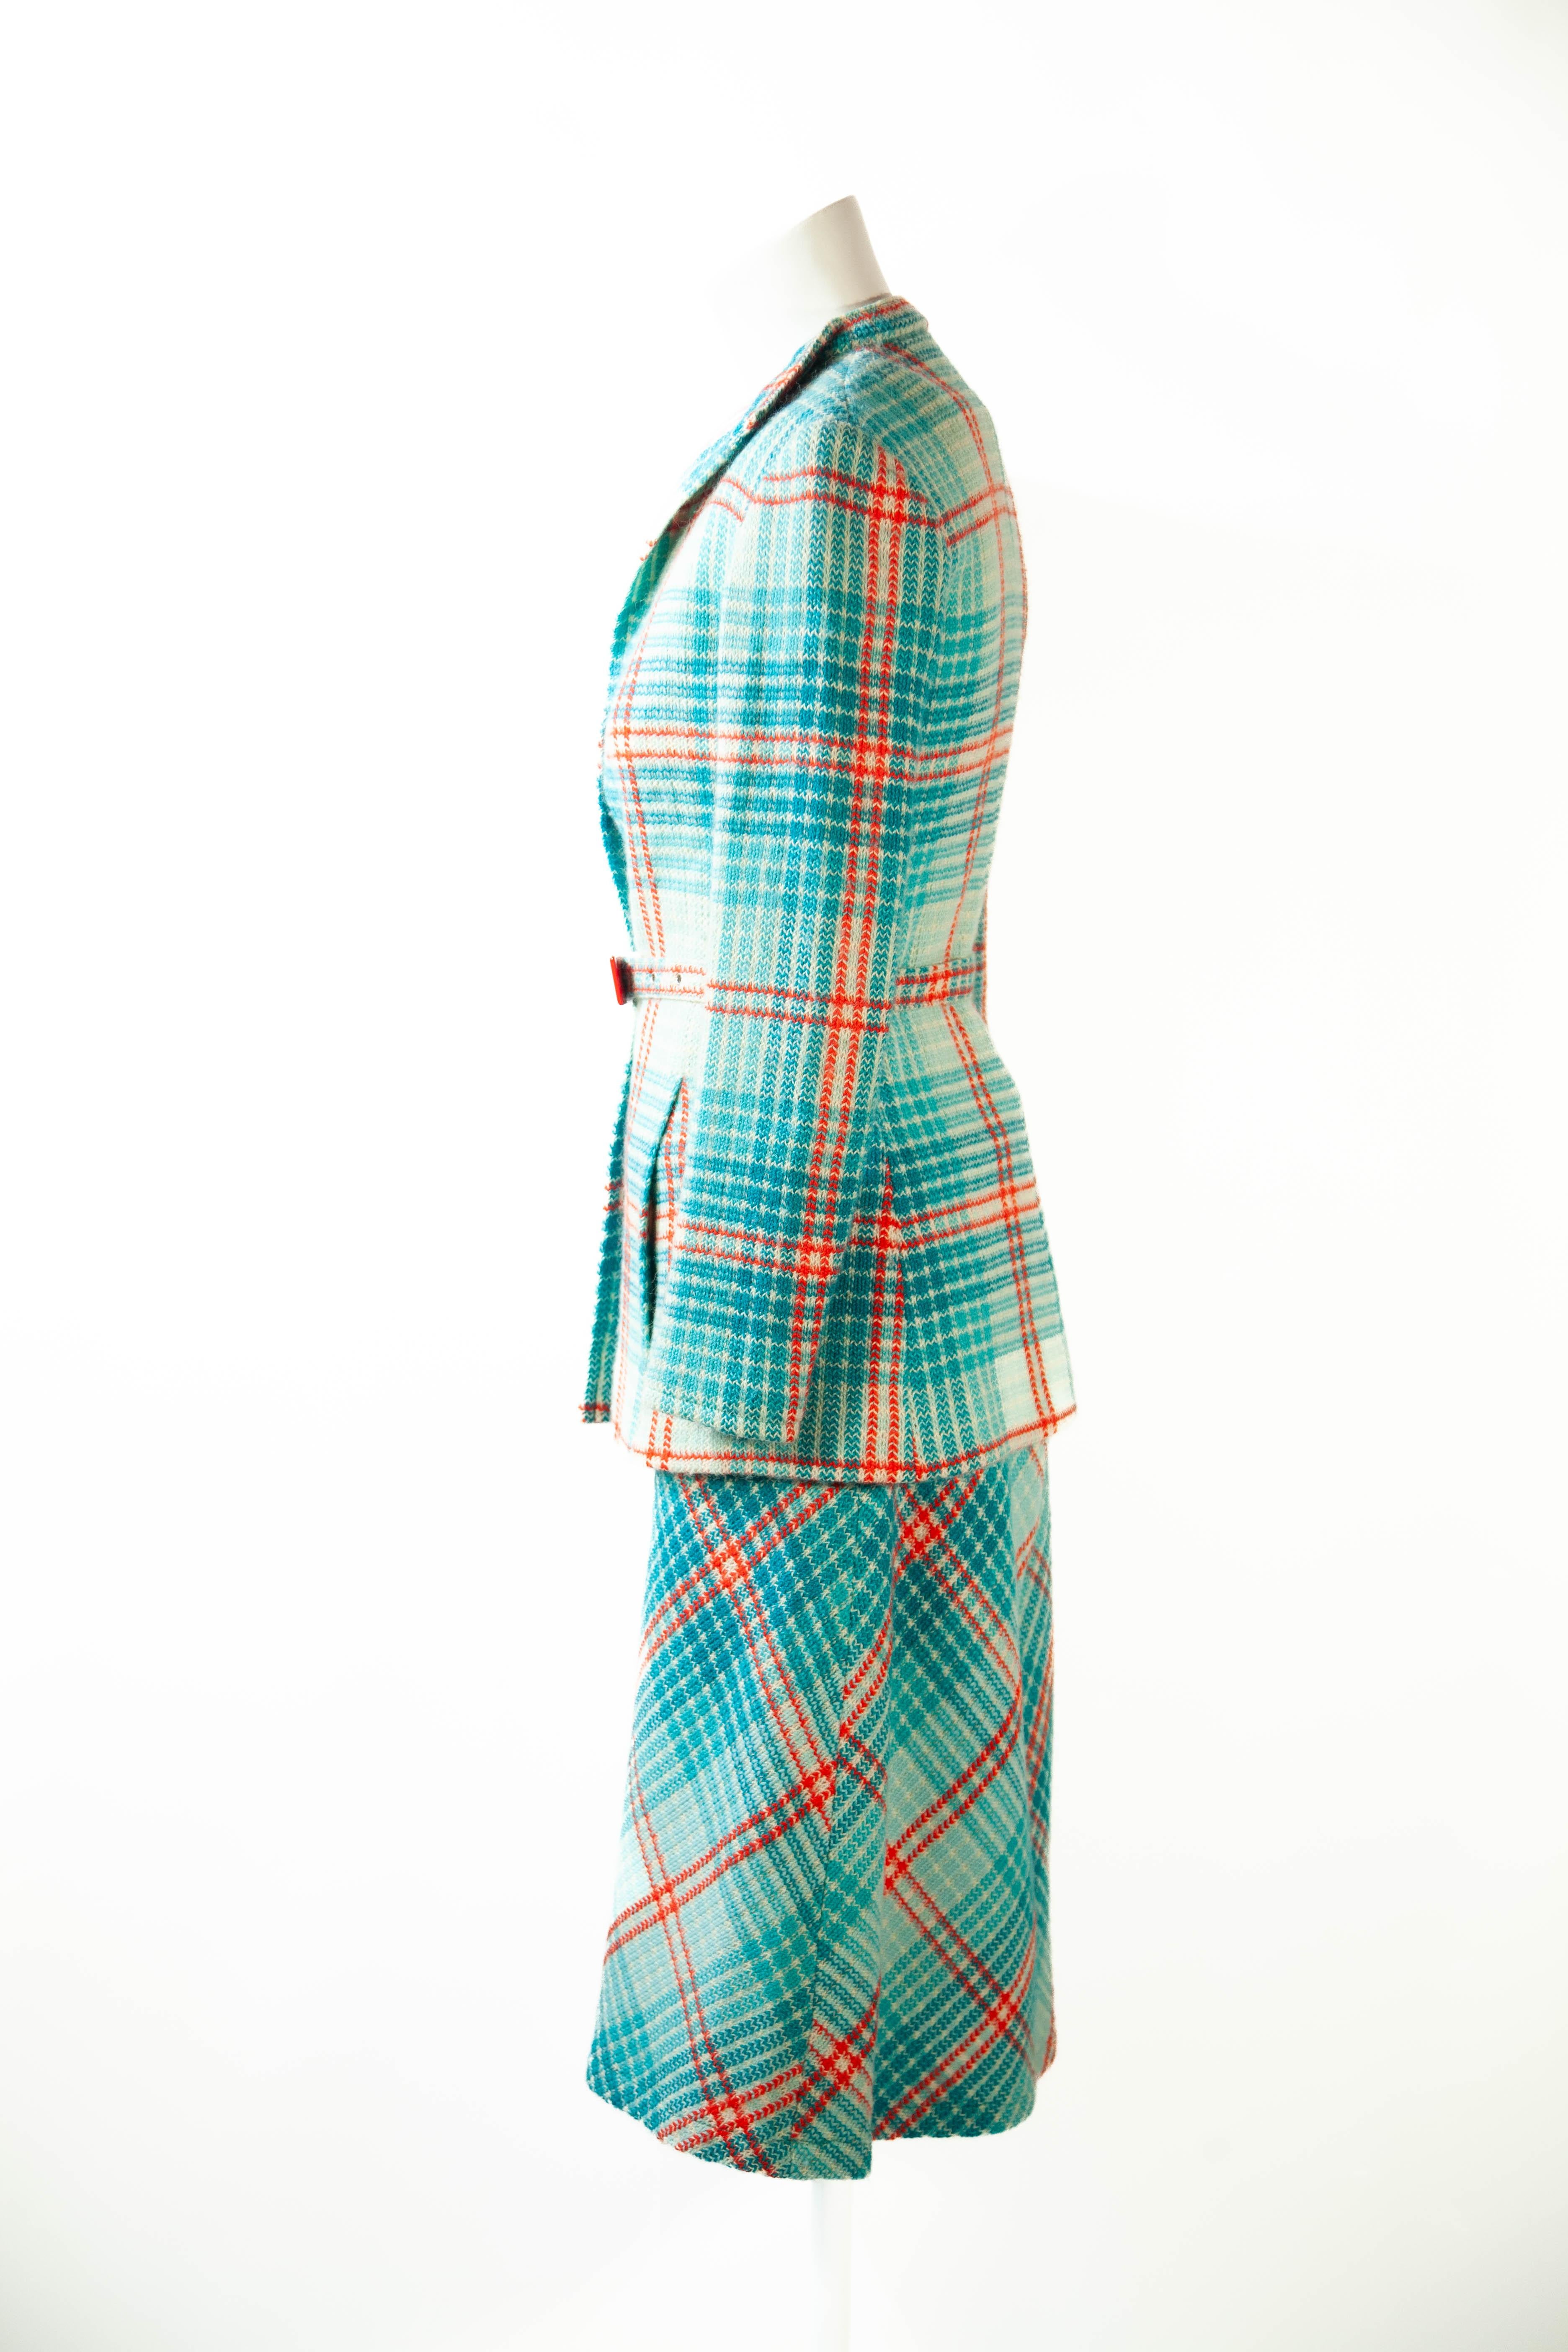 Missoni, Museum Documented, Wool, Aqua Blue Plaid, Ensemble, 1972 In Excellent Condition For Sale In Kingston, NY